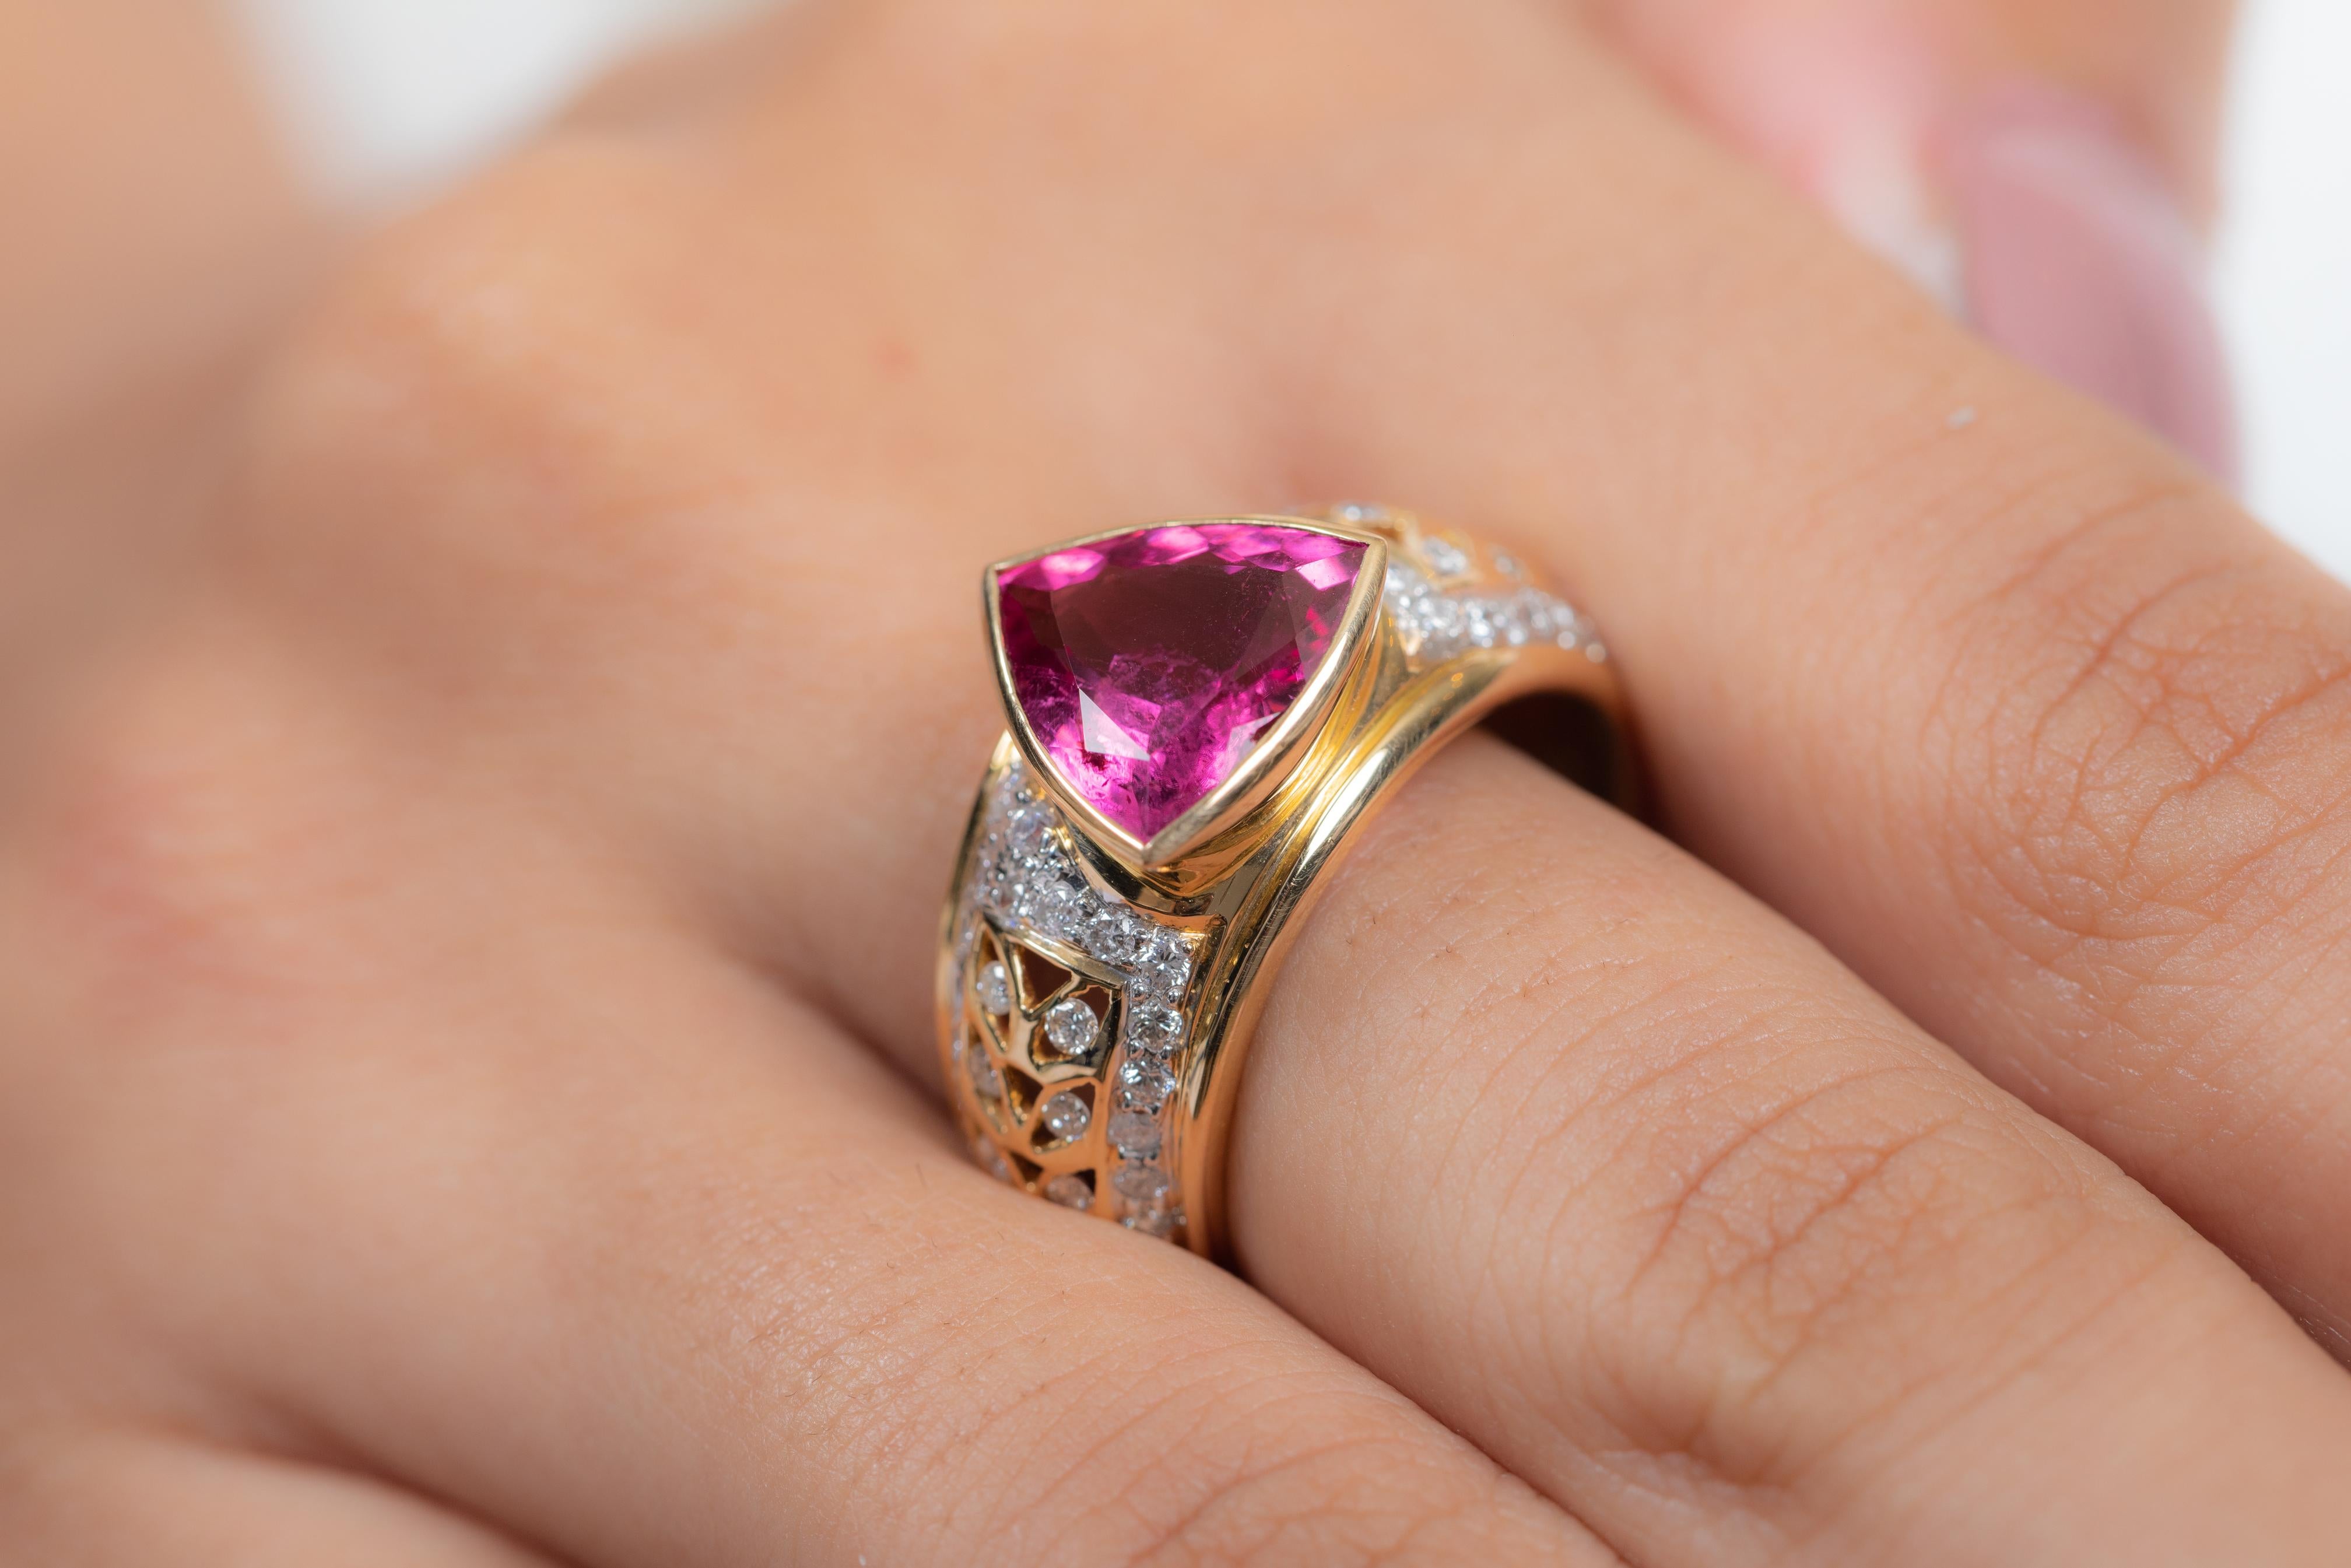 For Sale:  2.81 Carat Trillion cut Ruby Diamond Bridal Ring in 18K Yellow Gold  2